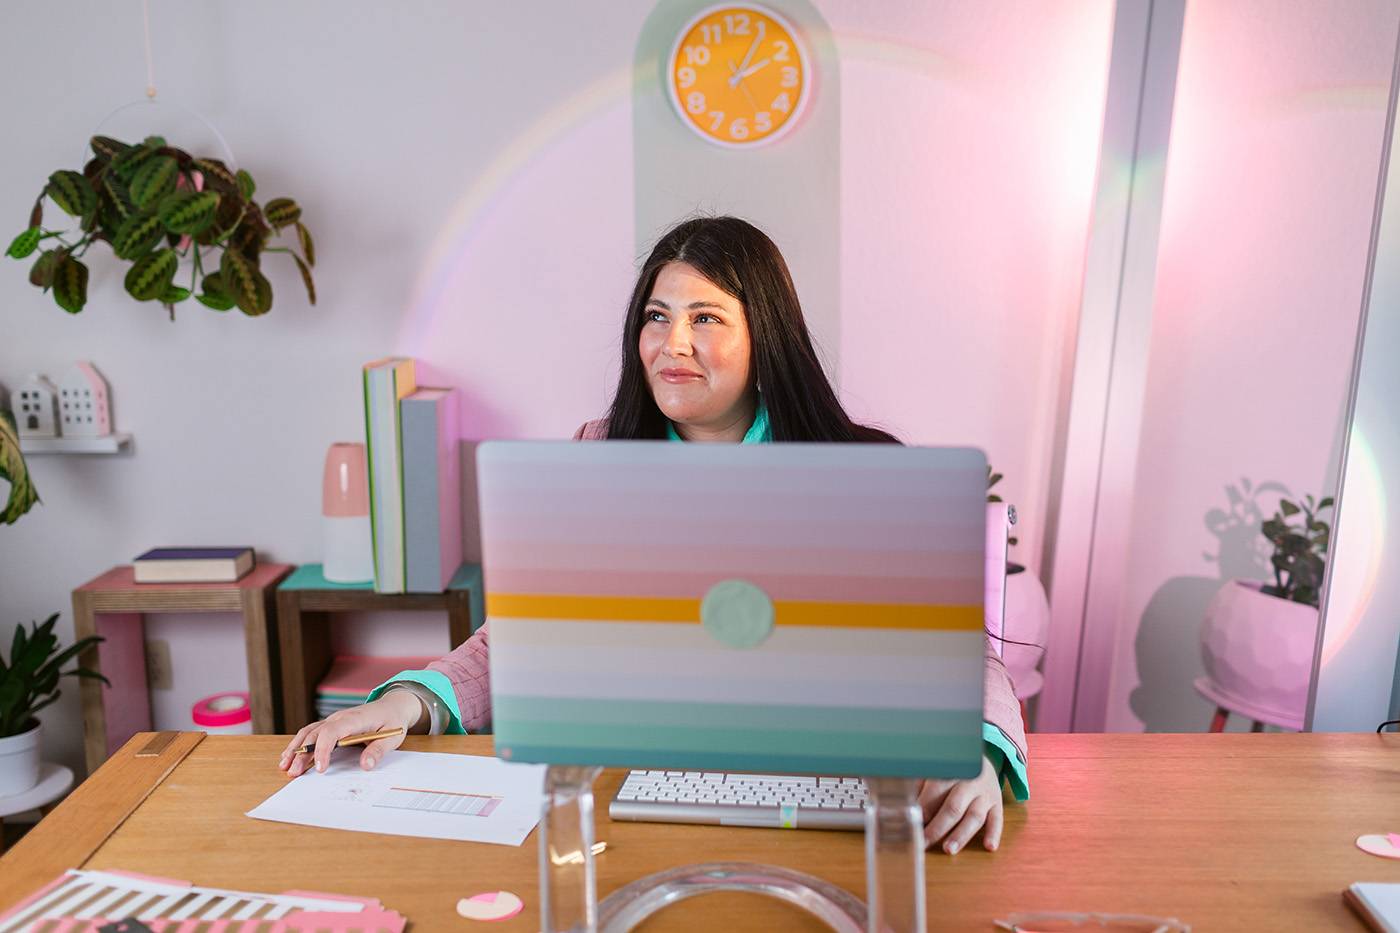 Female Entrepreneur in pink LED lights office working in a laptop on stand by graphics, rainbow and wall clock